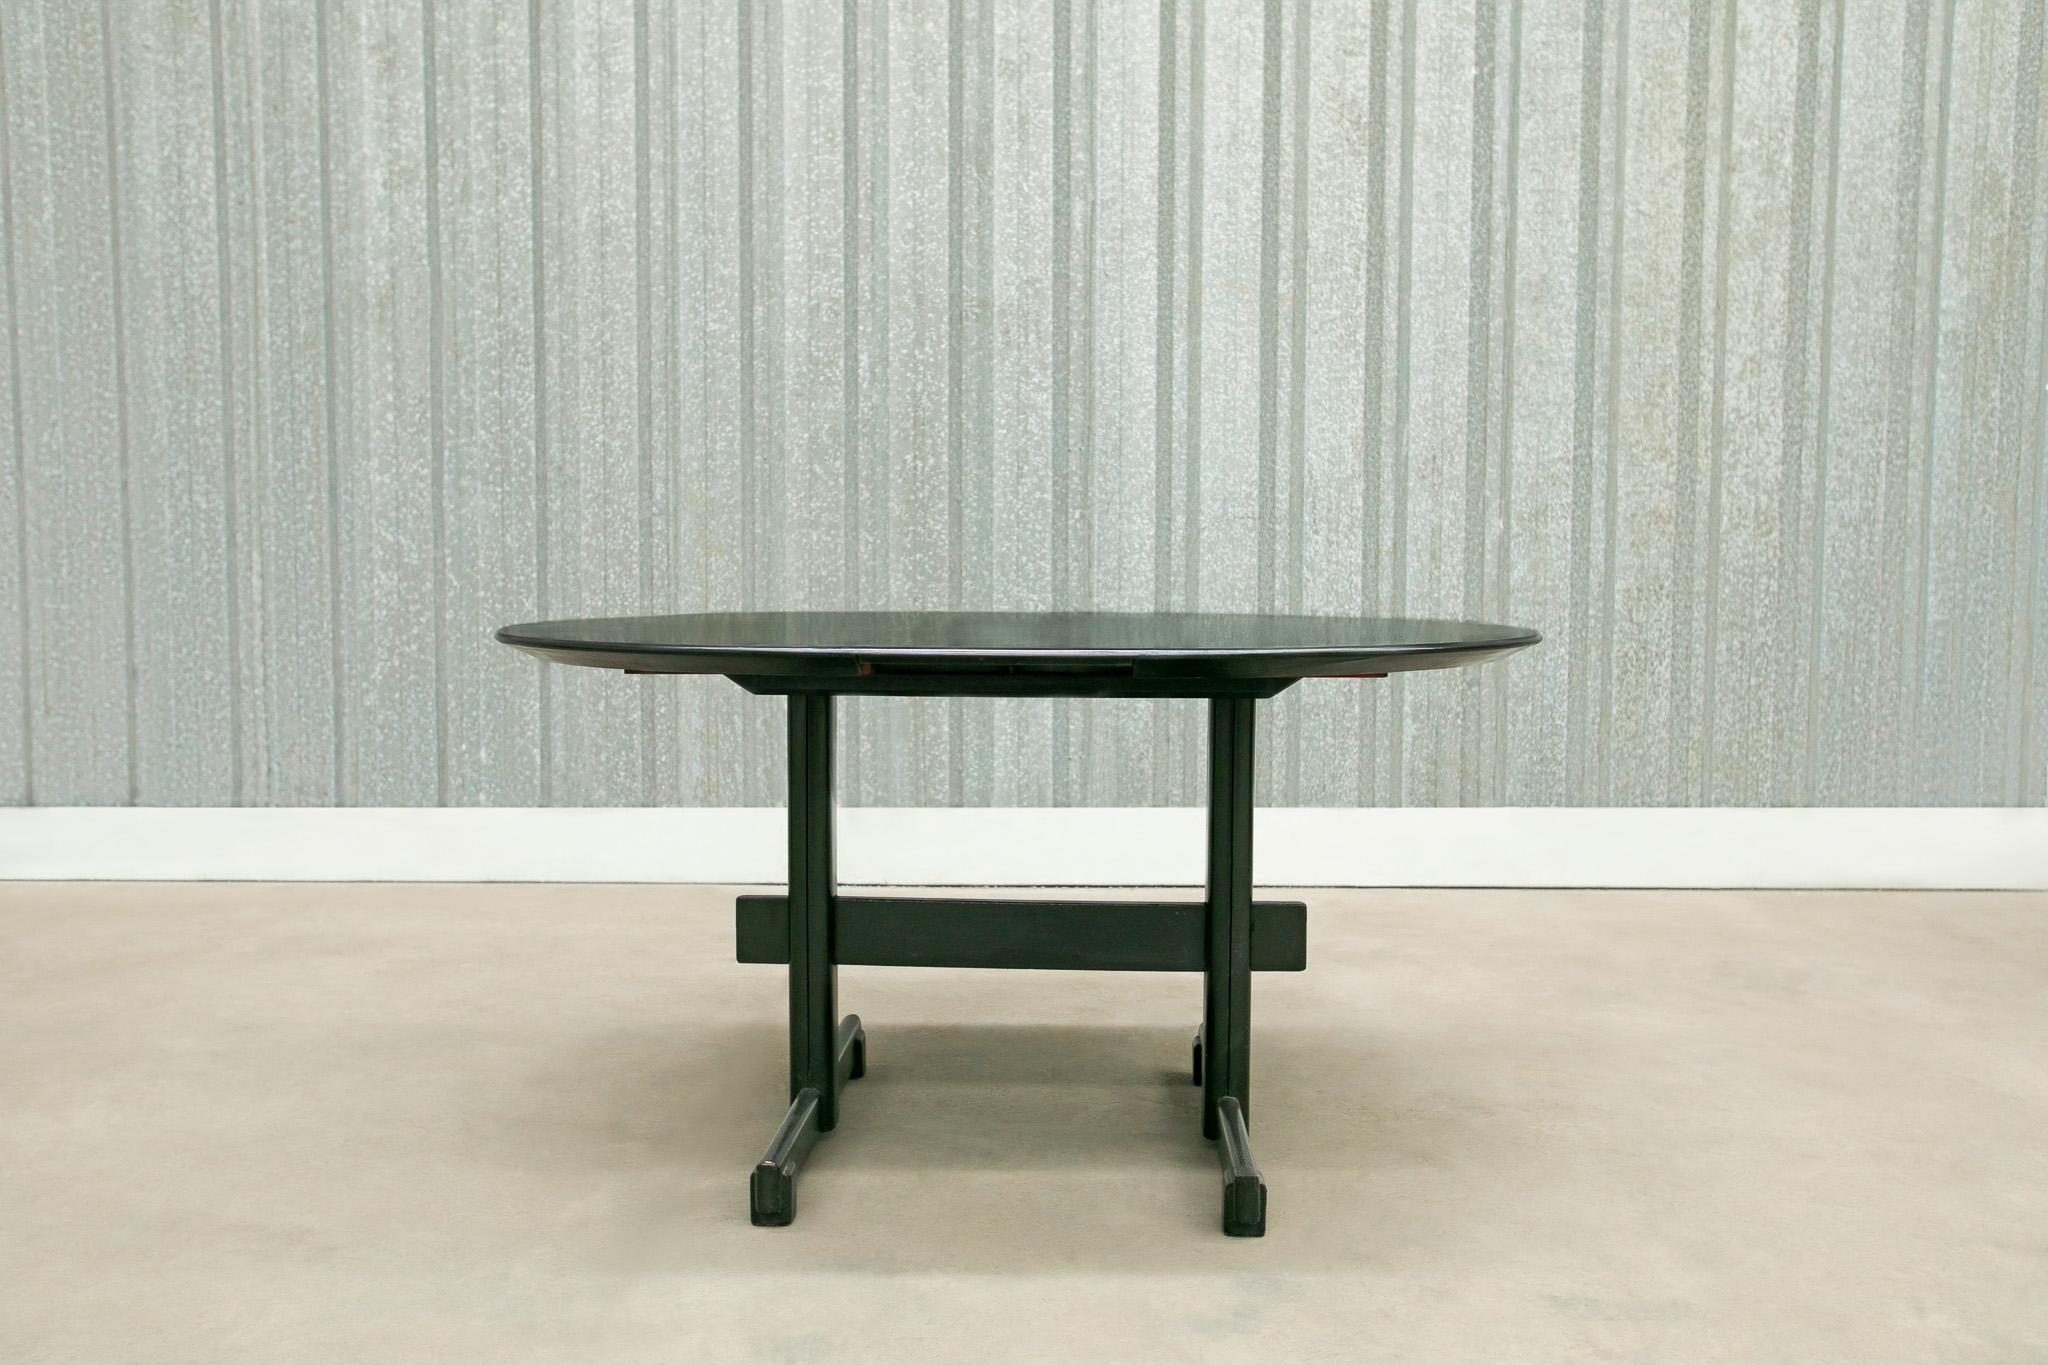 Available now, this very Brazilian Modern Eextendable table in hardwood with Ebony finish, designed by Novo Rumo, in the sixties in Brazil is simply spectacular!

The table features a hardwood structure with two legs with an oval top with beveled